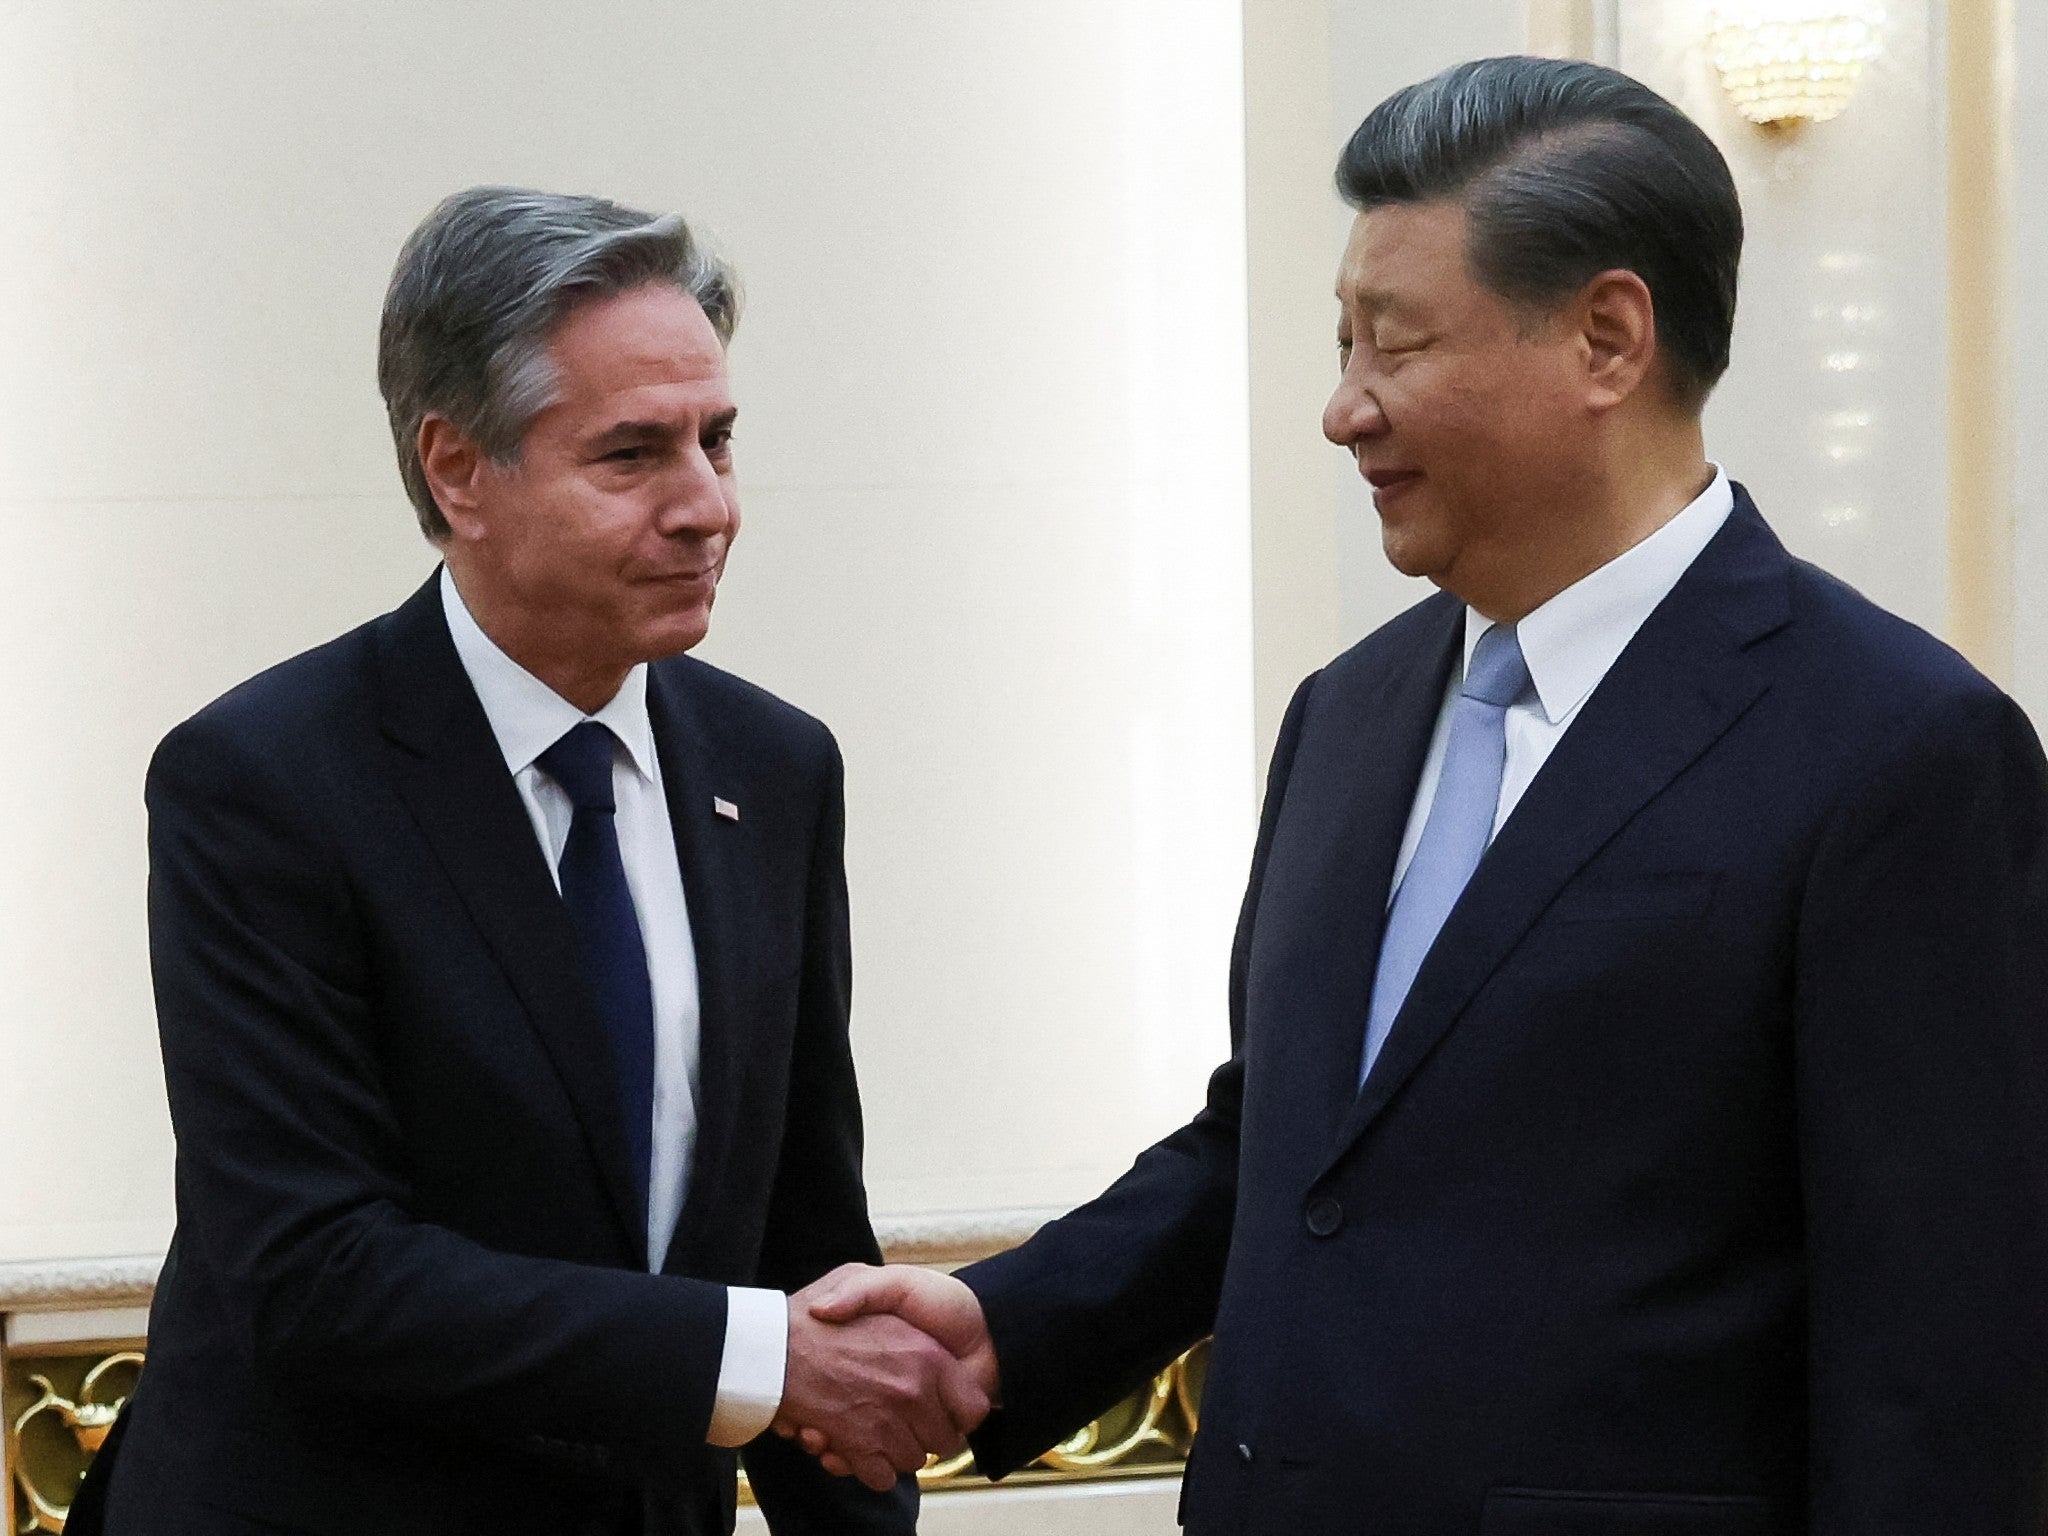 US Secretary of State Antony Blinken shakes hands with Chinese President Xi Jinping in the Great Hall of the People in Beijing